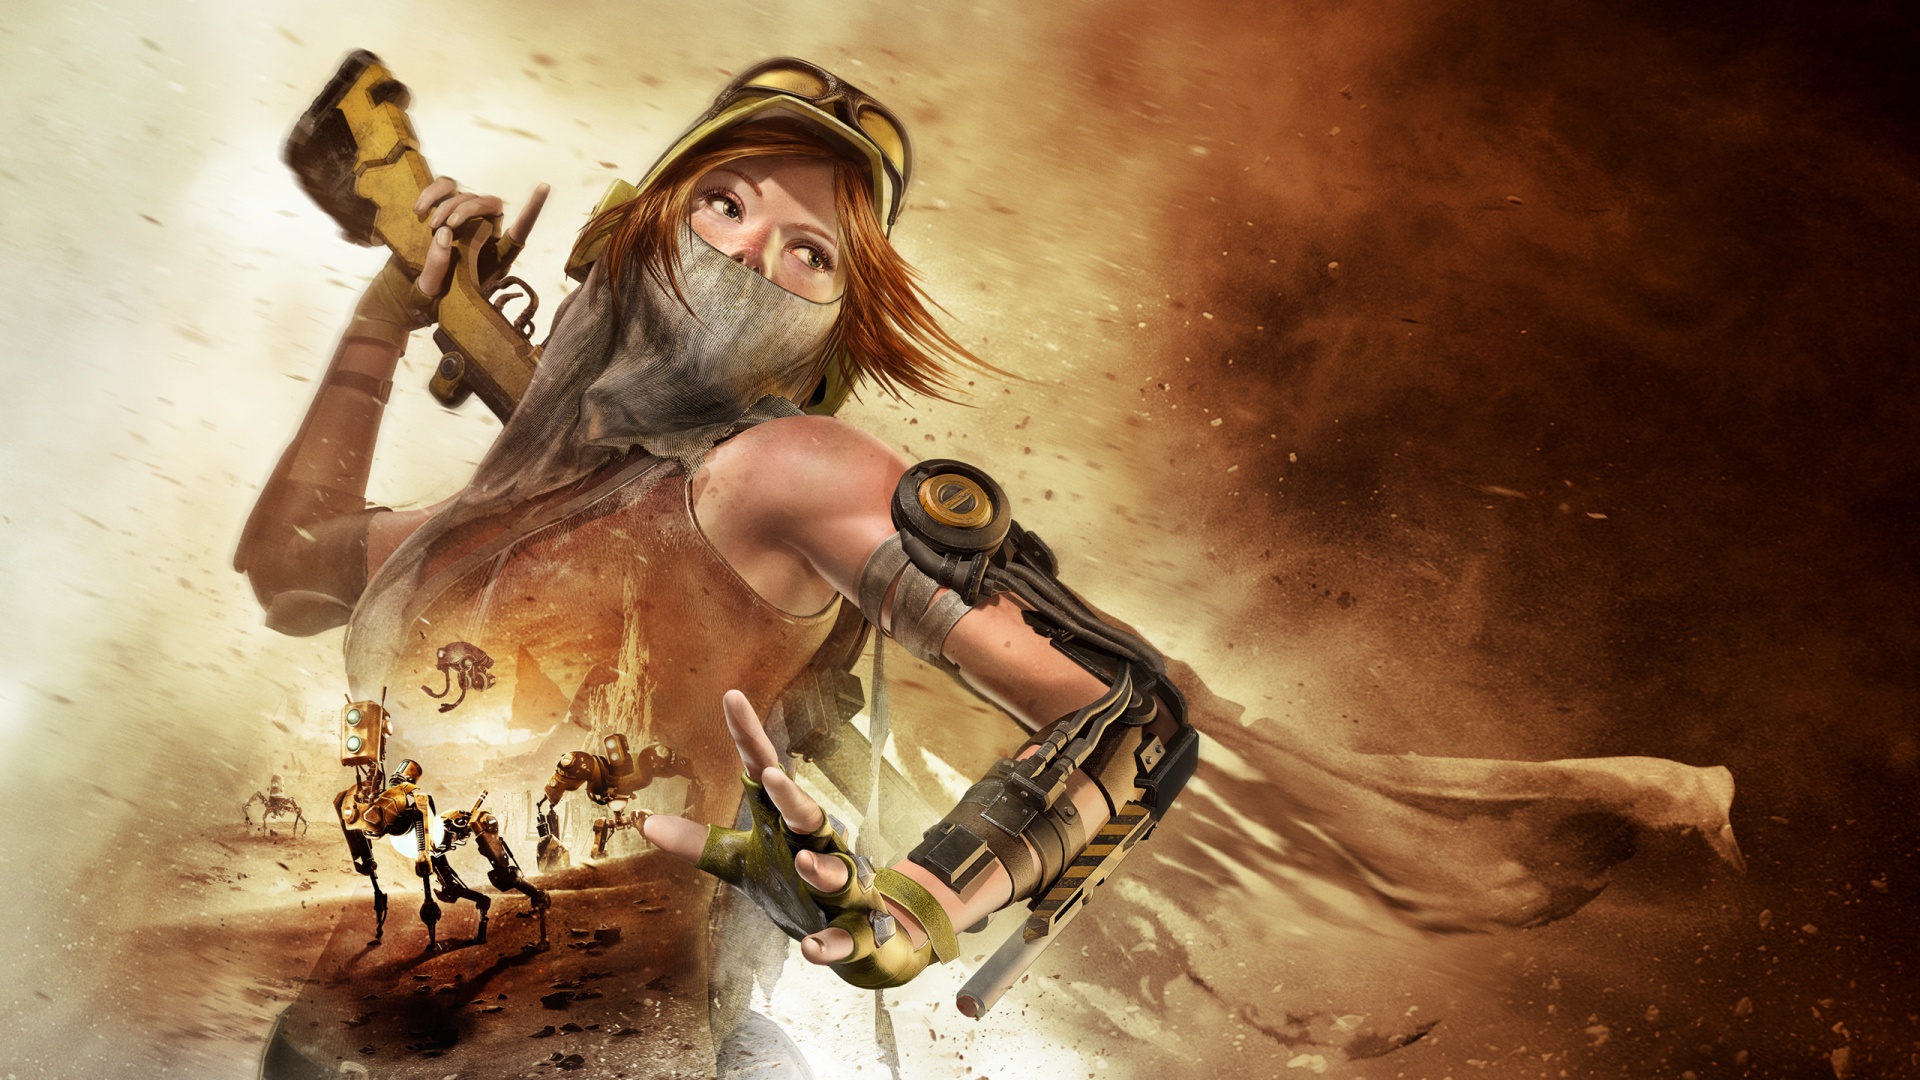 ReCore HD Xbox One Wallpapers in jpg format for free download